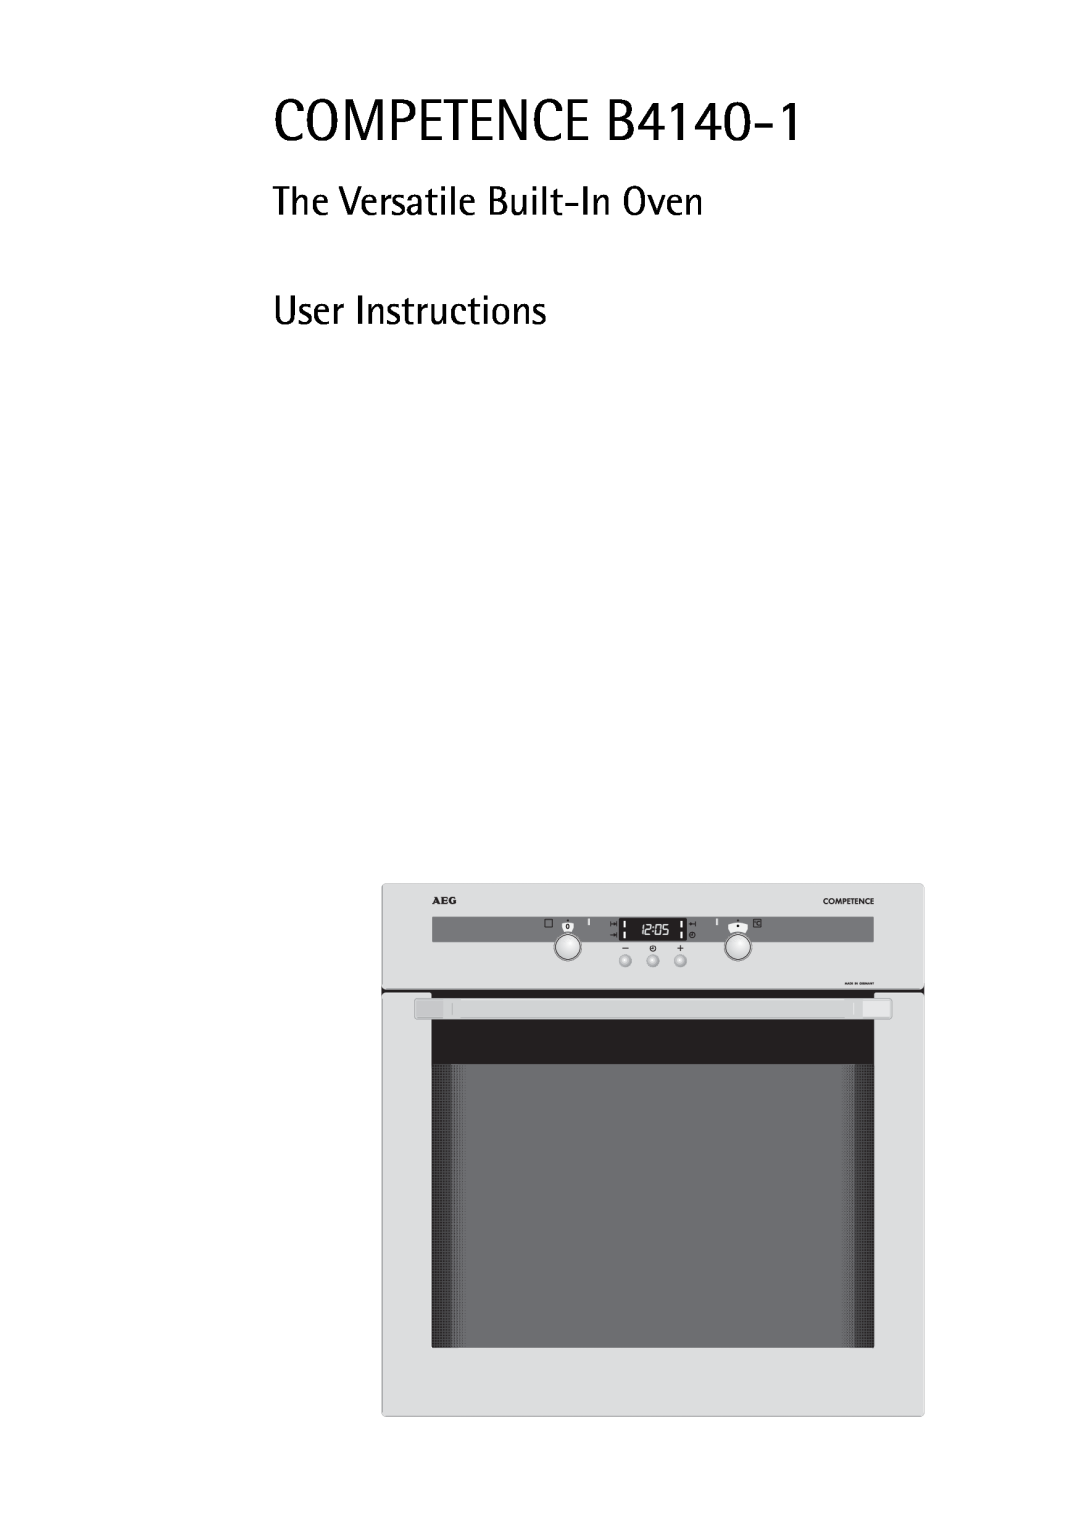 Electrolux manual COMPETENCE B4140-1, The Versatile Built-In Oven User Instructions 